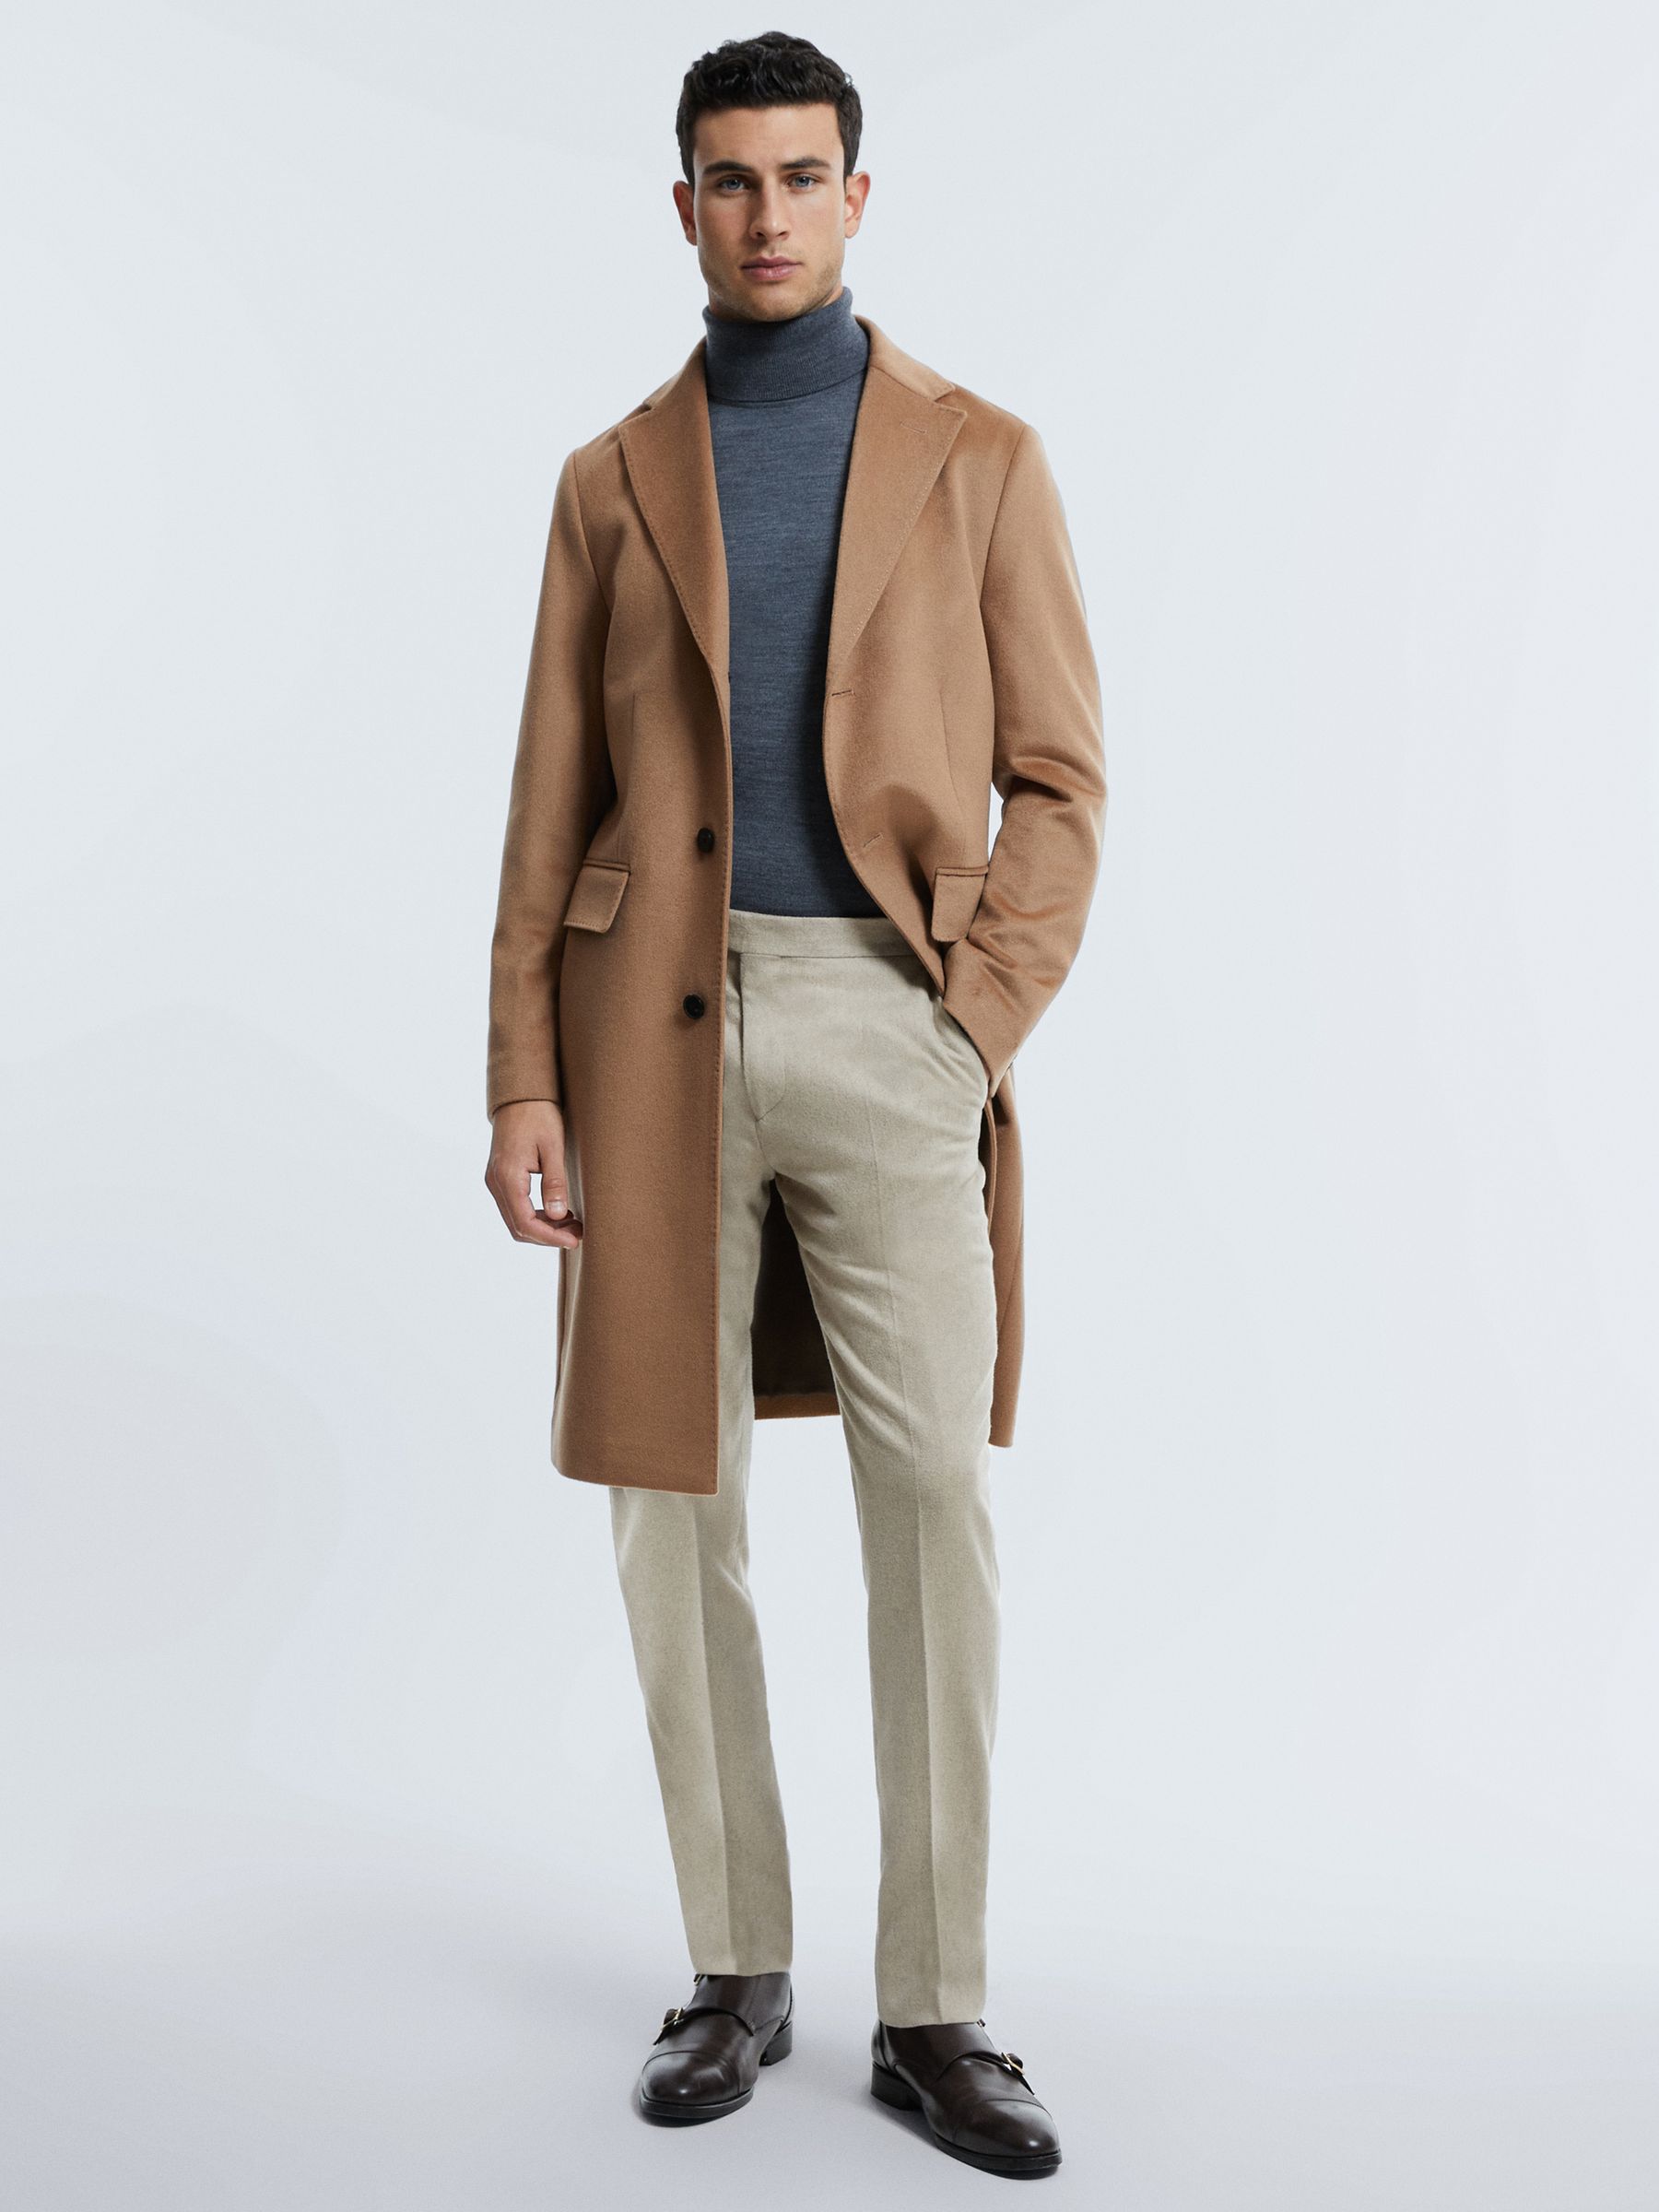 Atelier Cashmere Single Breasted Coat in Camel - REISS